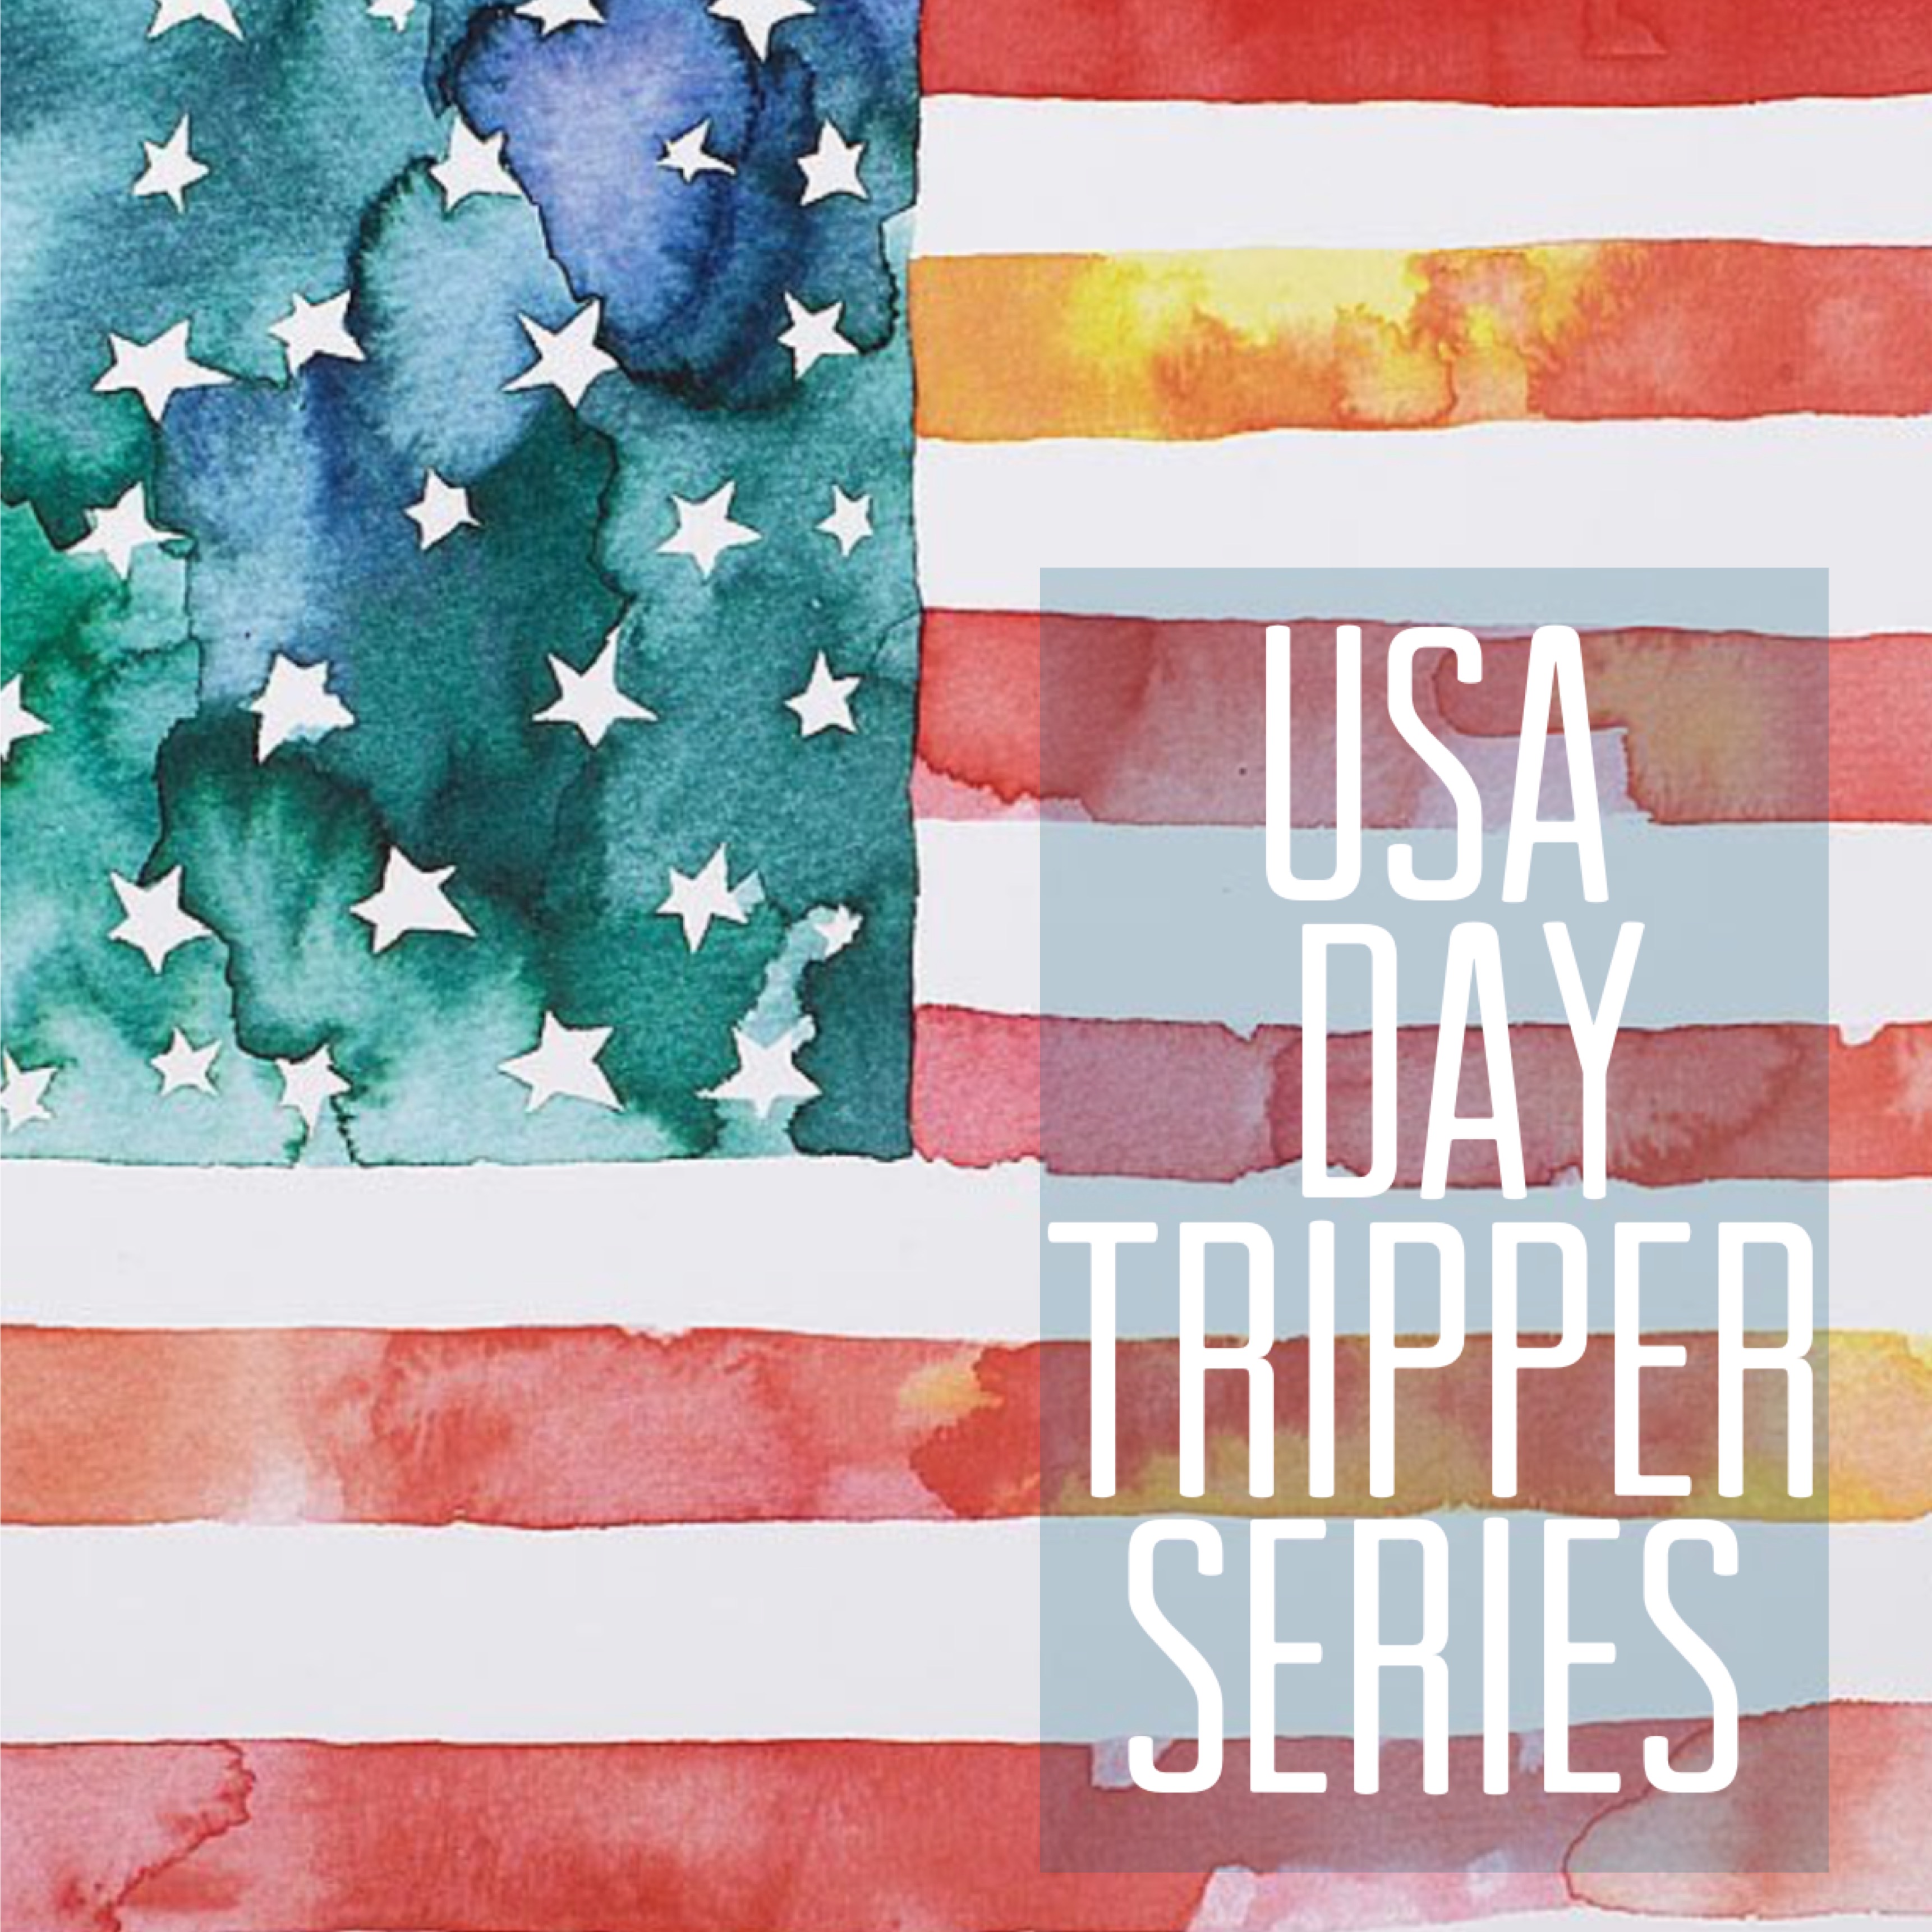 USA Day Tripper Series: Introduction